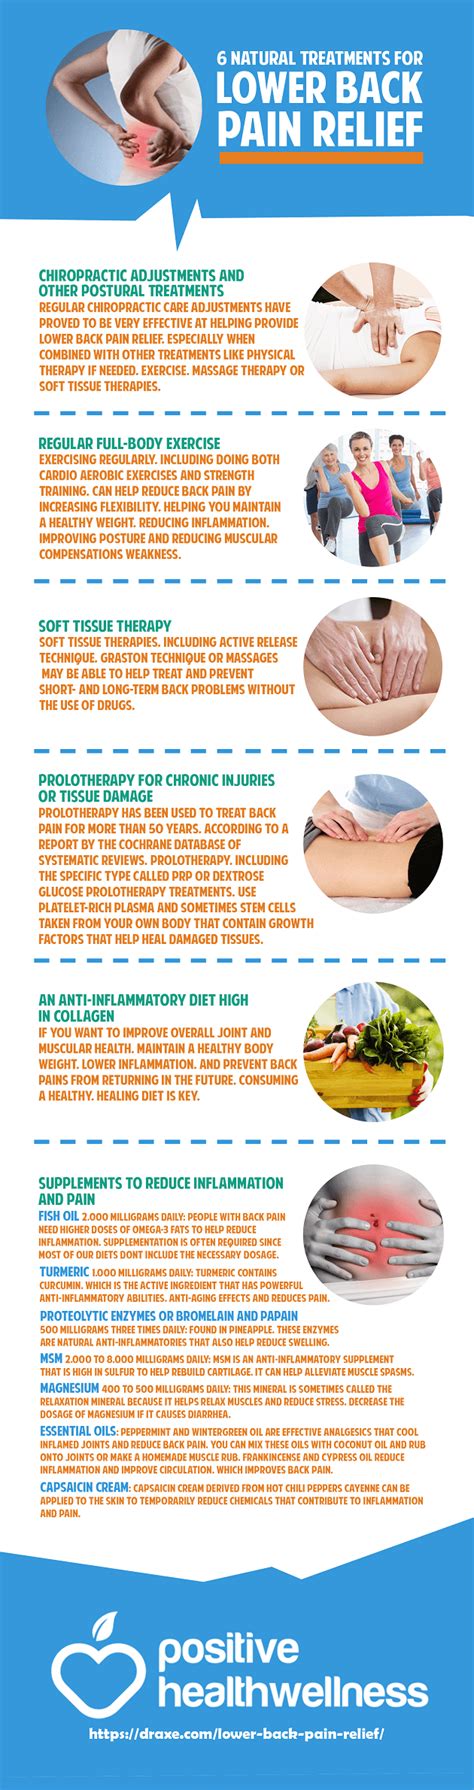 6 Natural Treatments For Lower Back Pain Relief Infographic